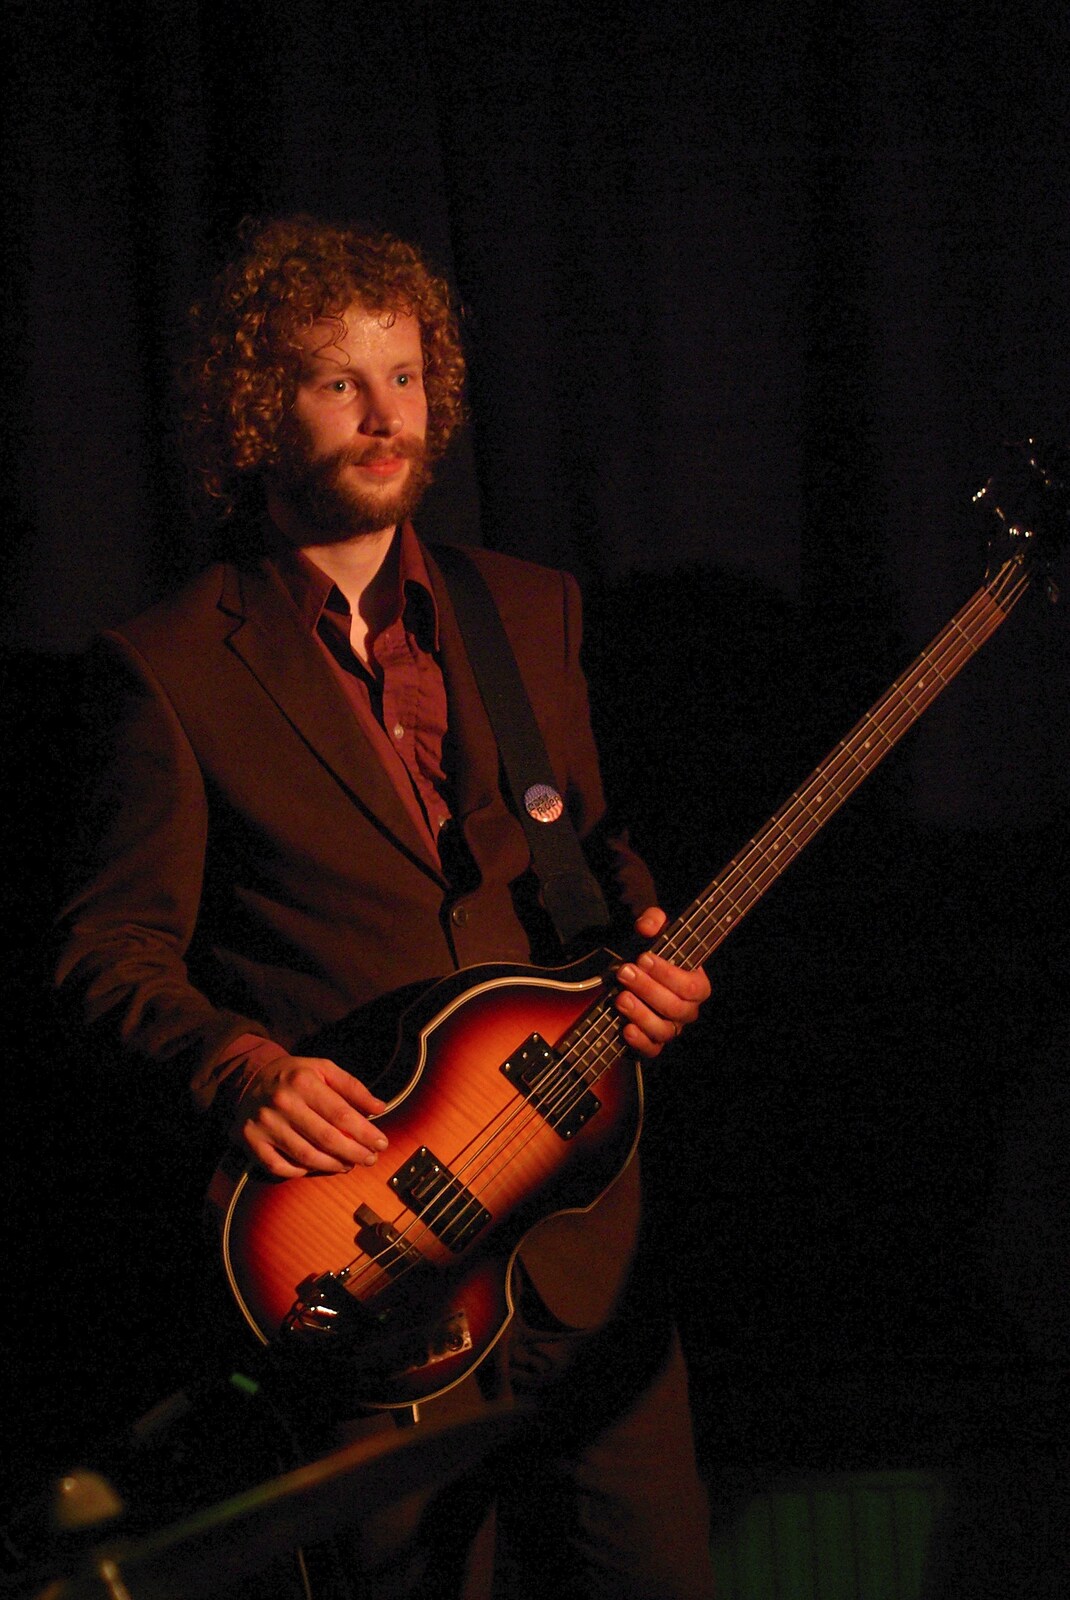 The Shivers Live at the Portland Arms, Cambridge - 26th August 2007: The Shivers' bass player